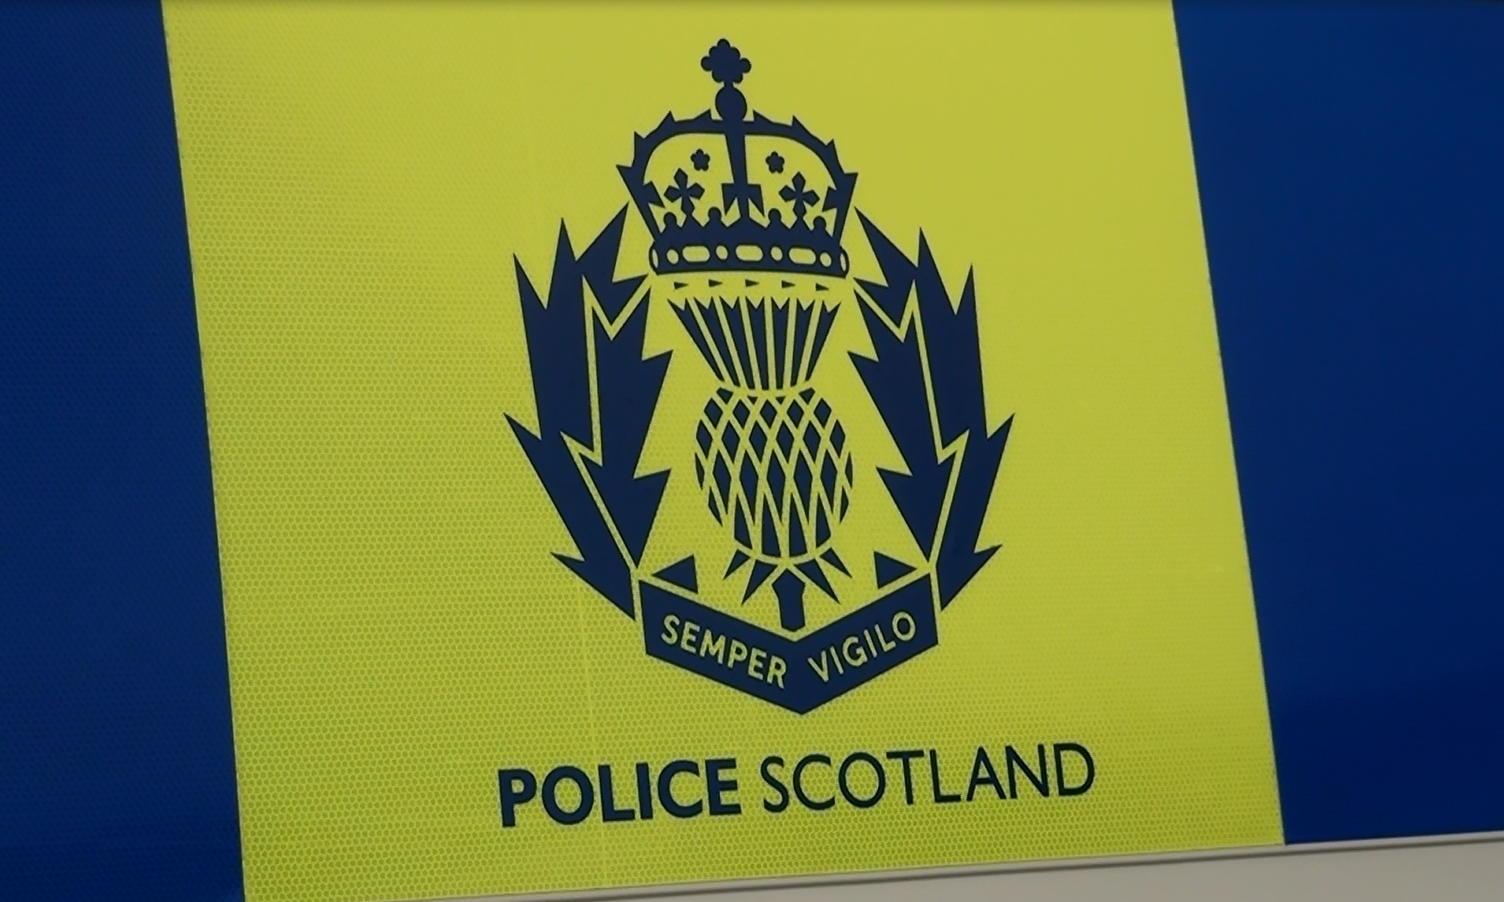 A major water search is underway in Perth after reports of someone jumping into the River Tay.